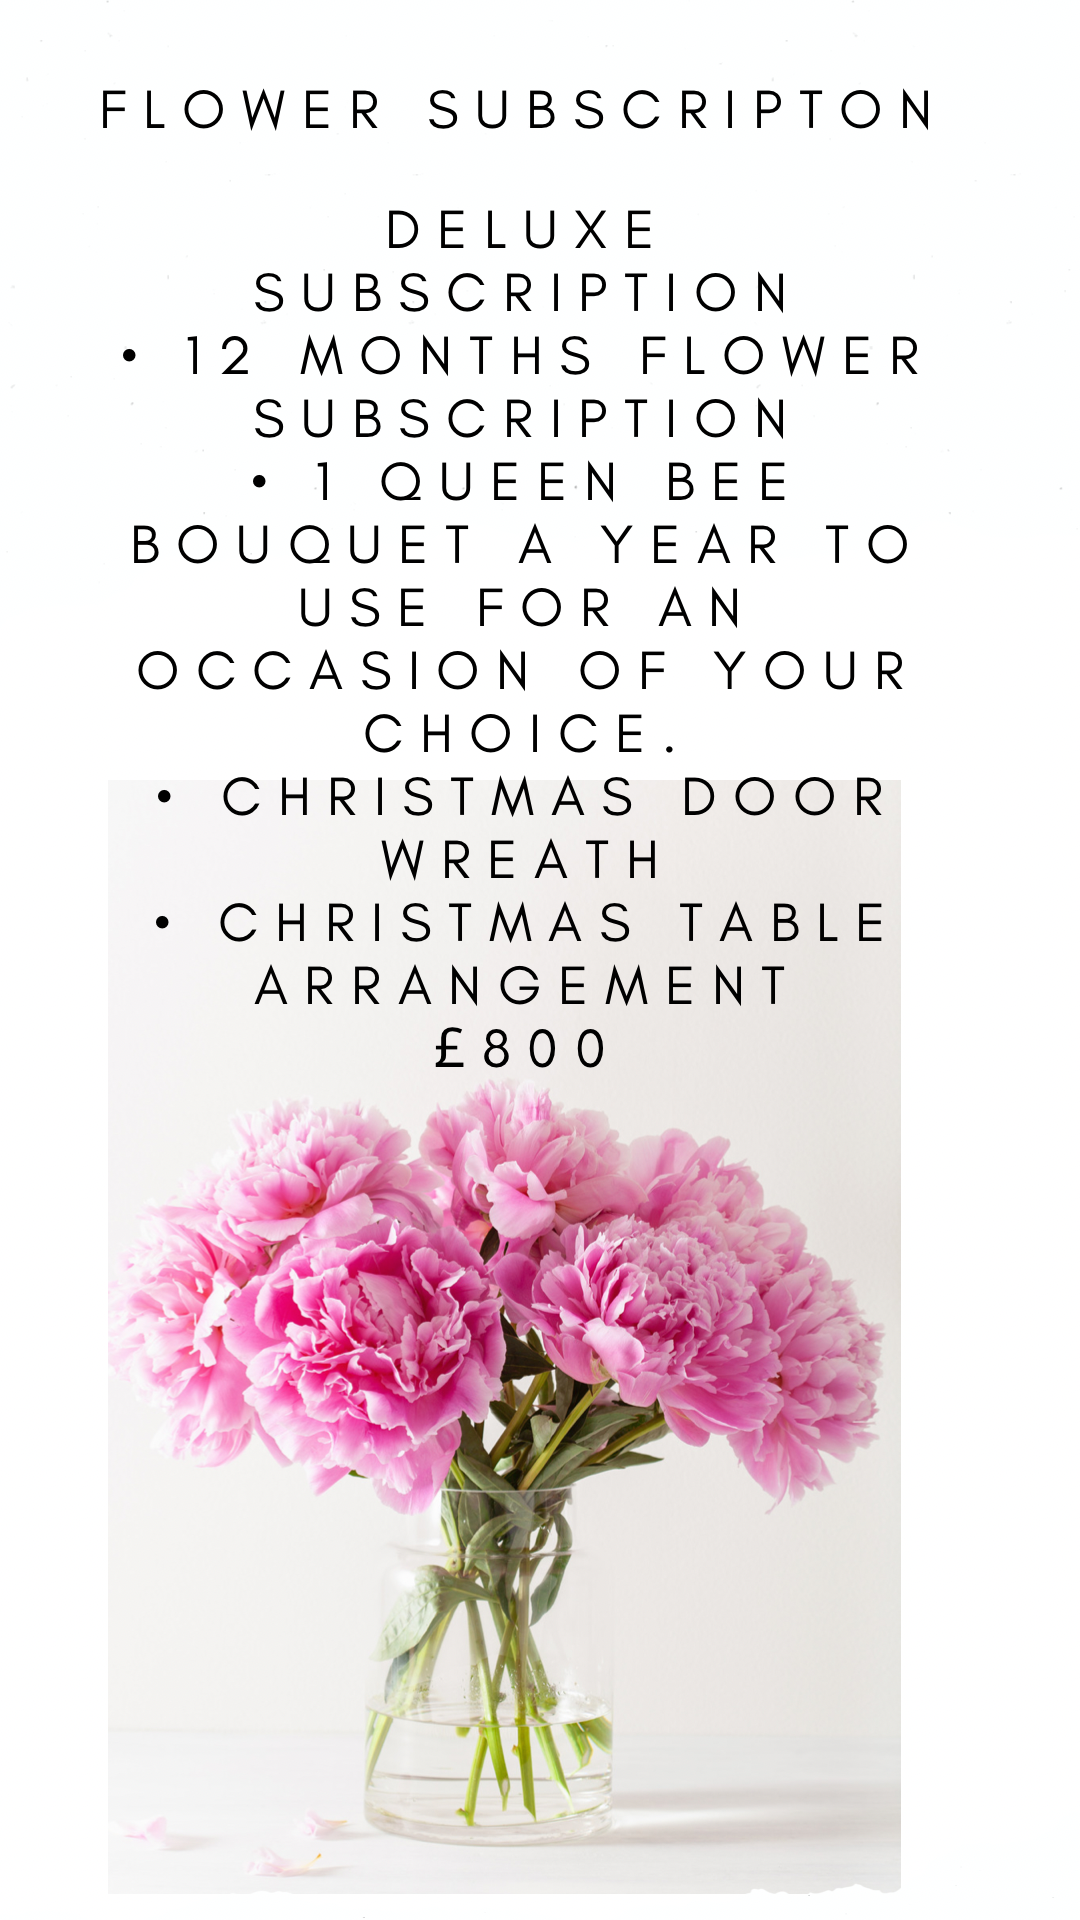 Lily & Bee | Waterlooville | Flower subscriptions